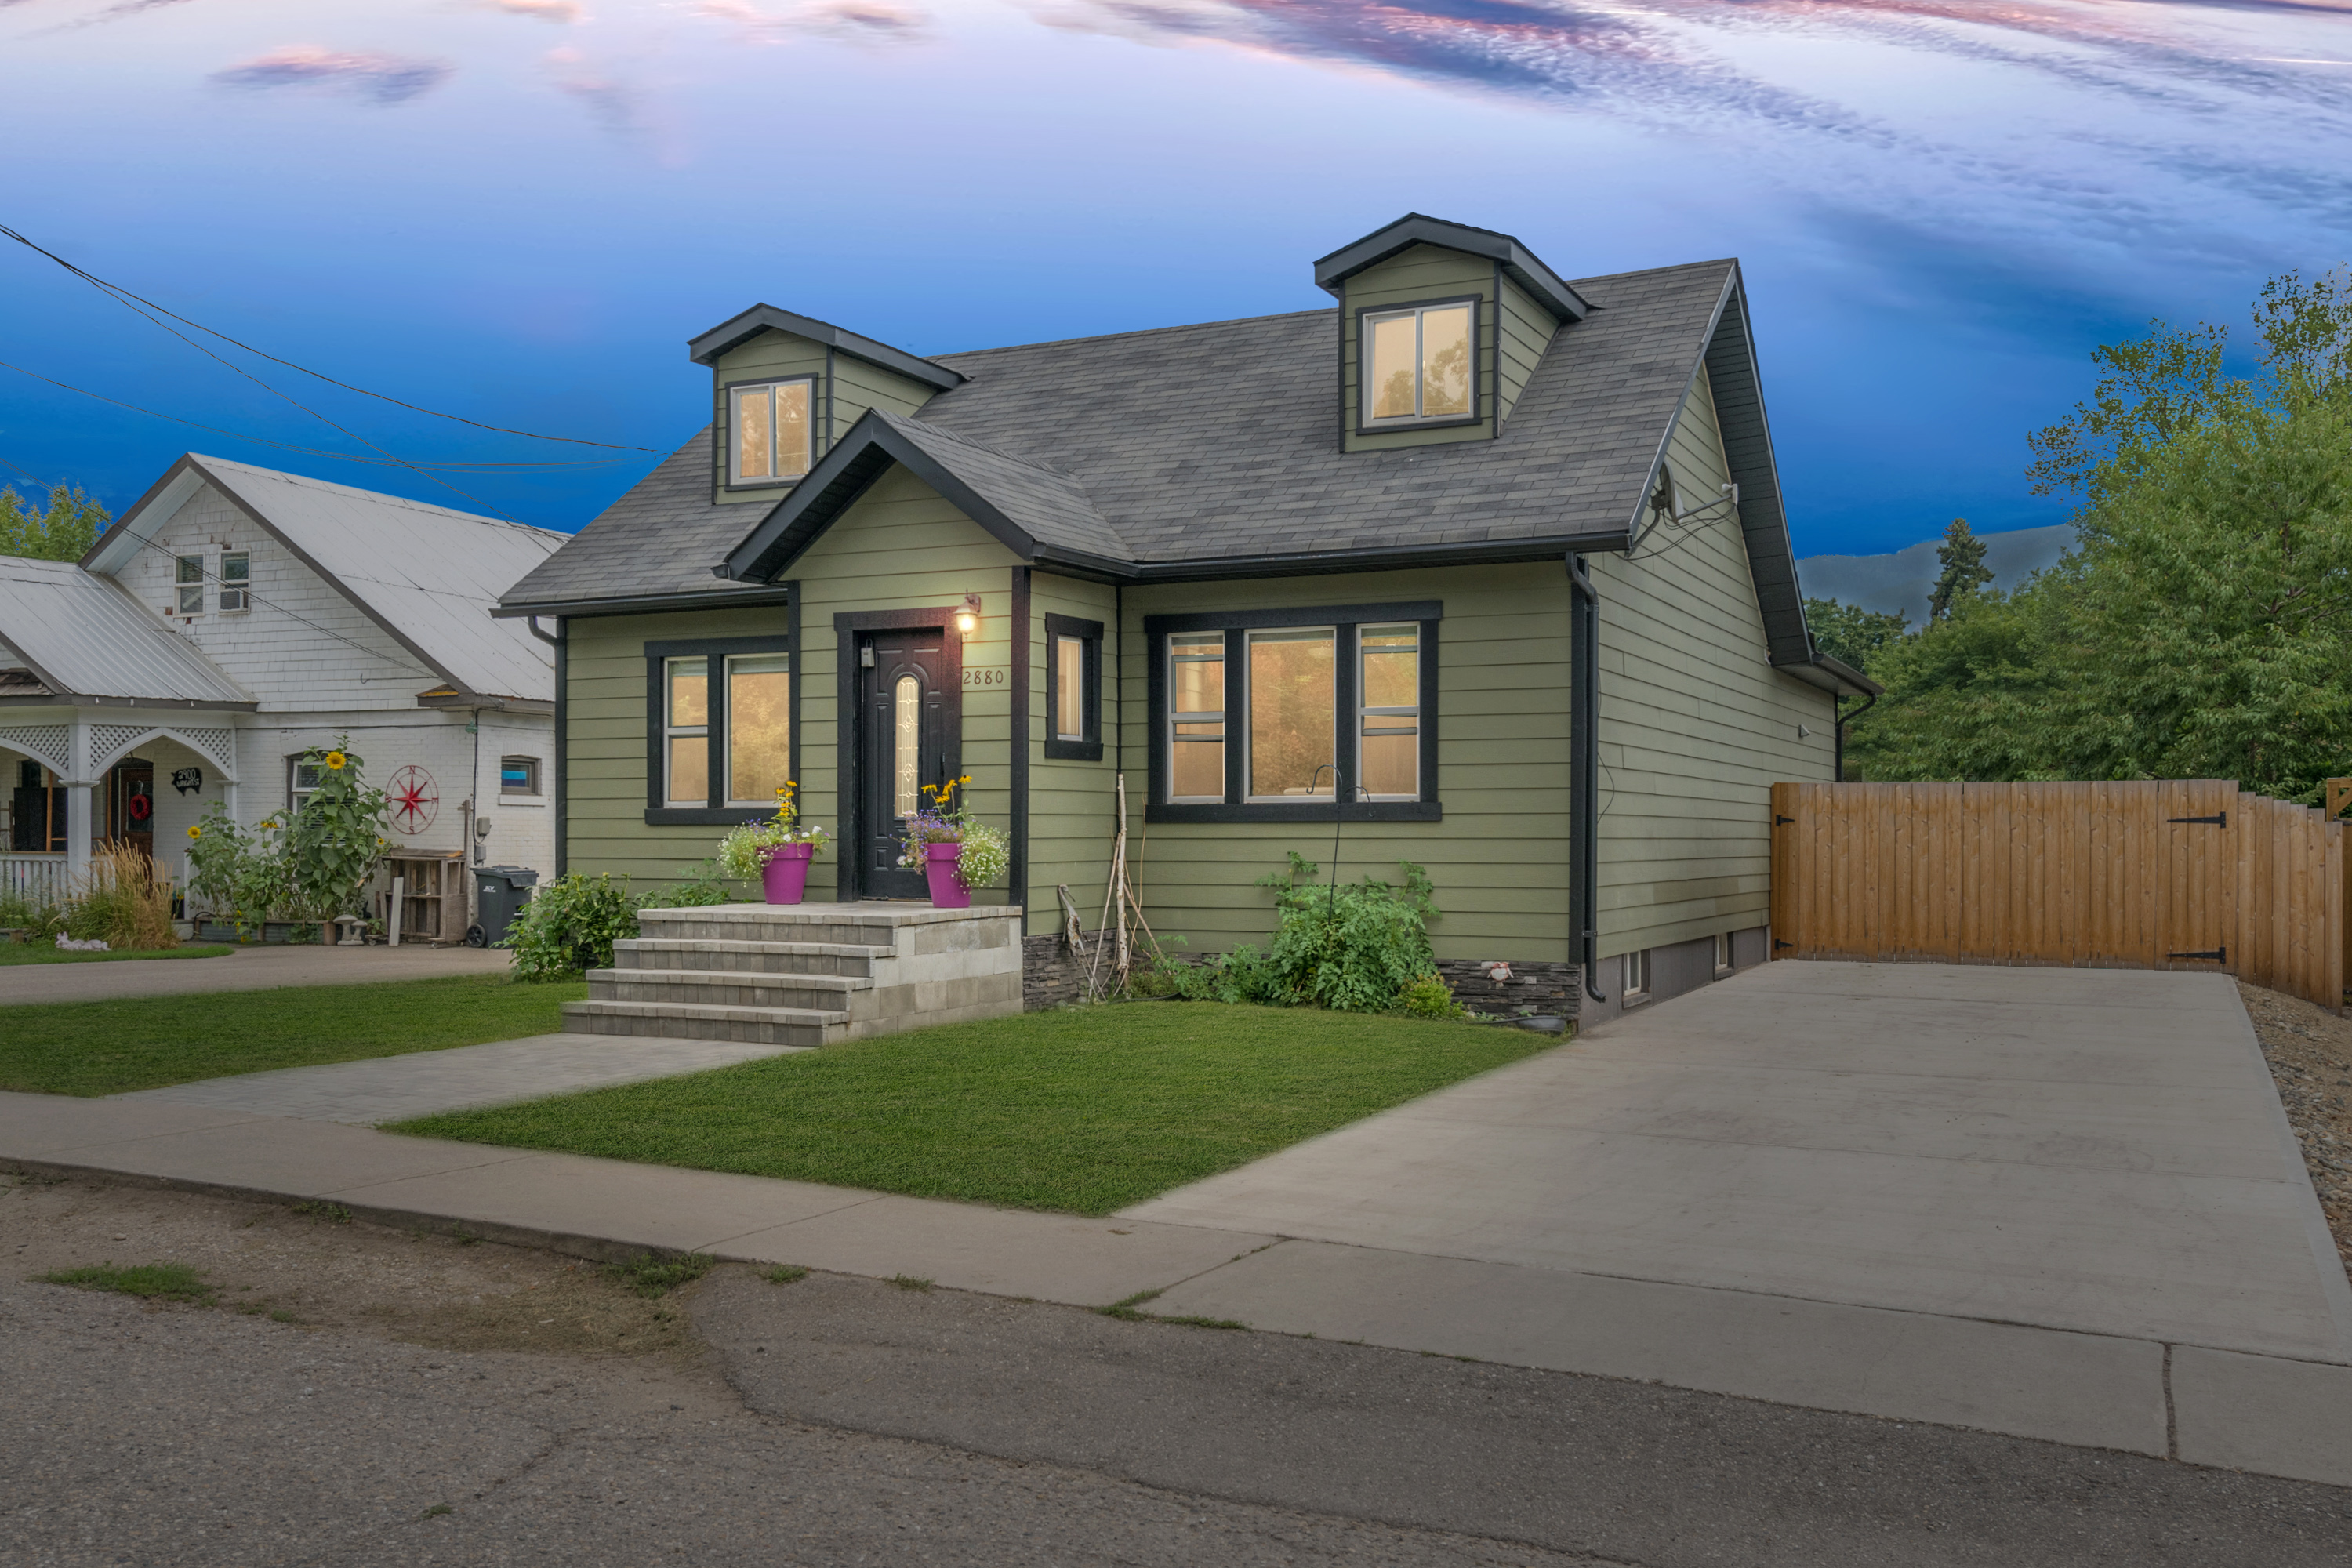 2880 Wright St. Armstrong, BC| $589,000